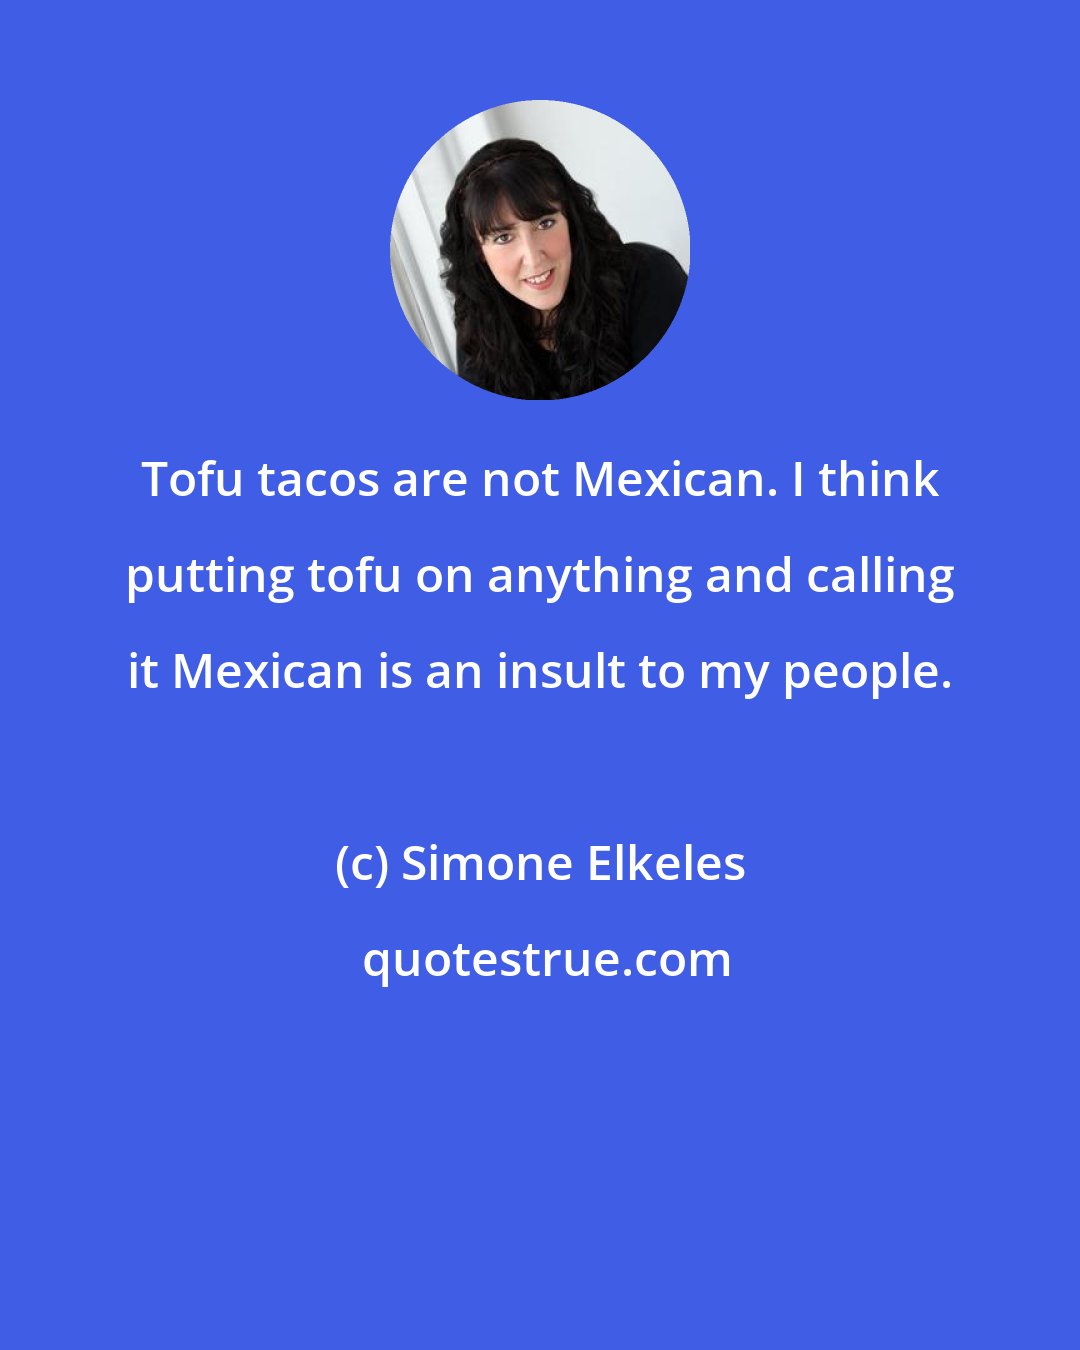 Simone Elkeles: Tofu tacos are not Mexican. I think putting tofu on anything and calling it Mexican is an insult to my people.